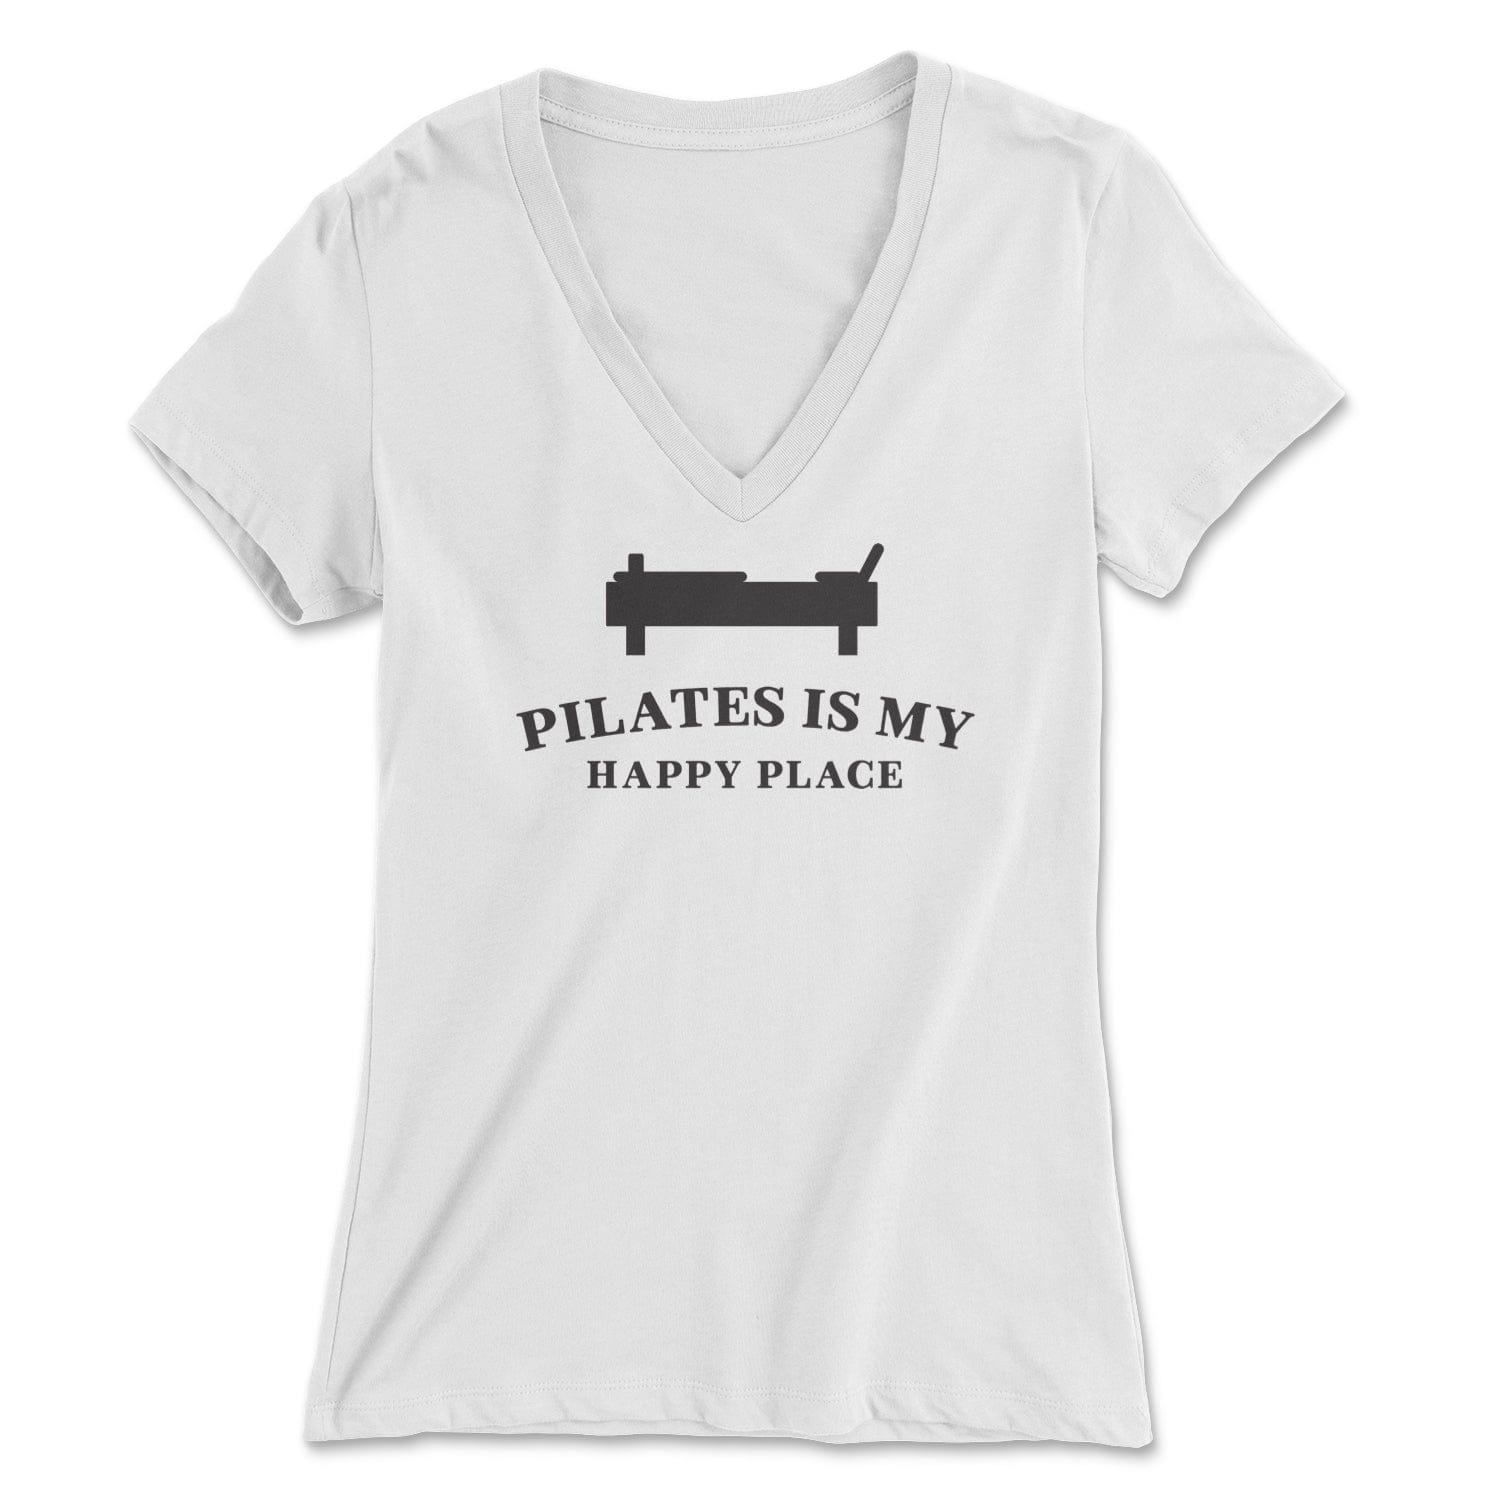 "Pilates is My Happy Place" - Women's V-Neck Tee Skyba Print Material